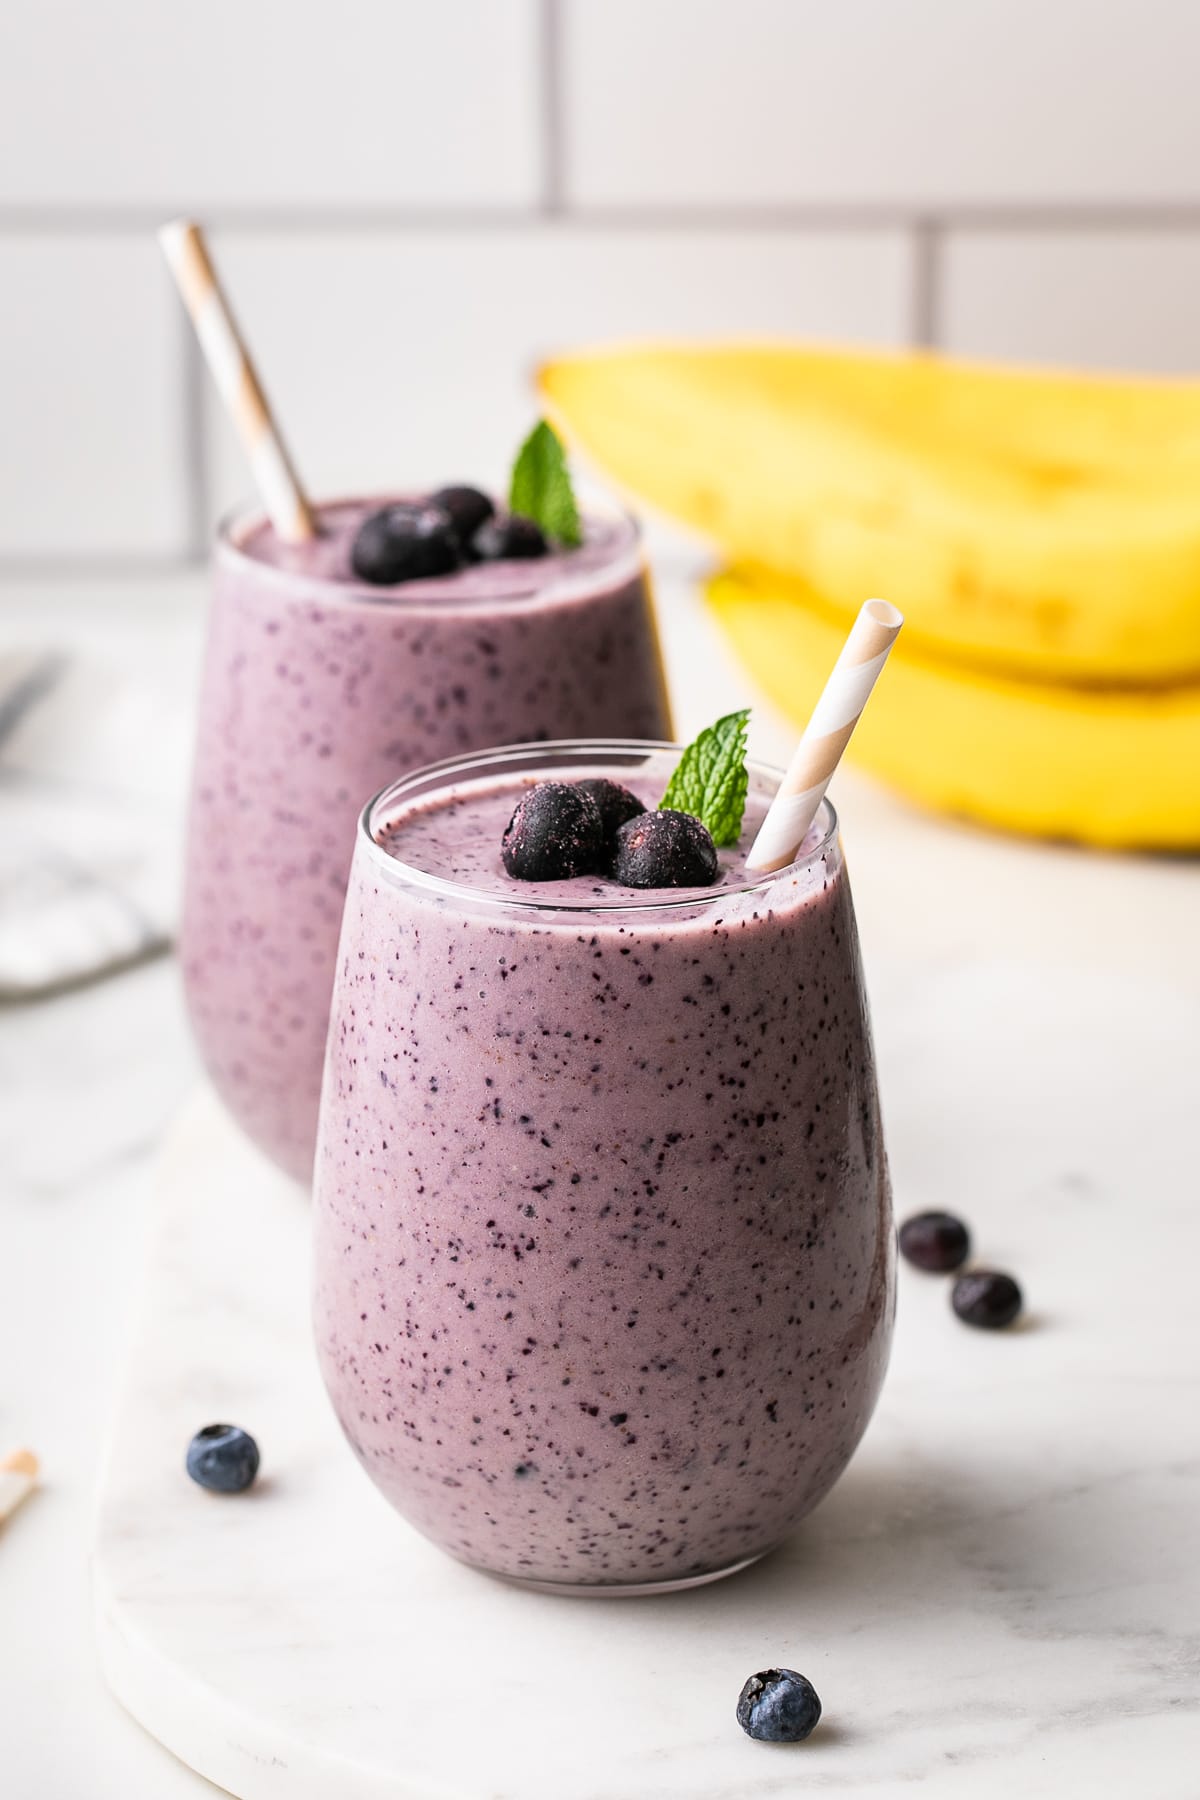 Blueberry Banana Smoothie Healthy, Vegan, Easy   The Simple ...